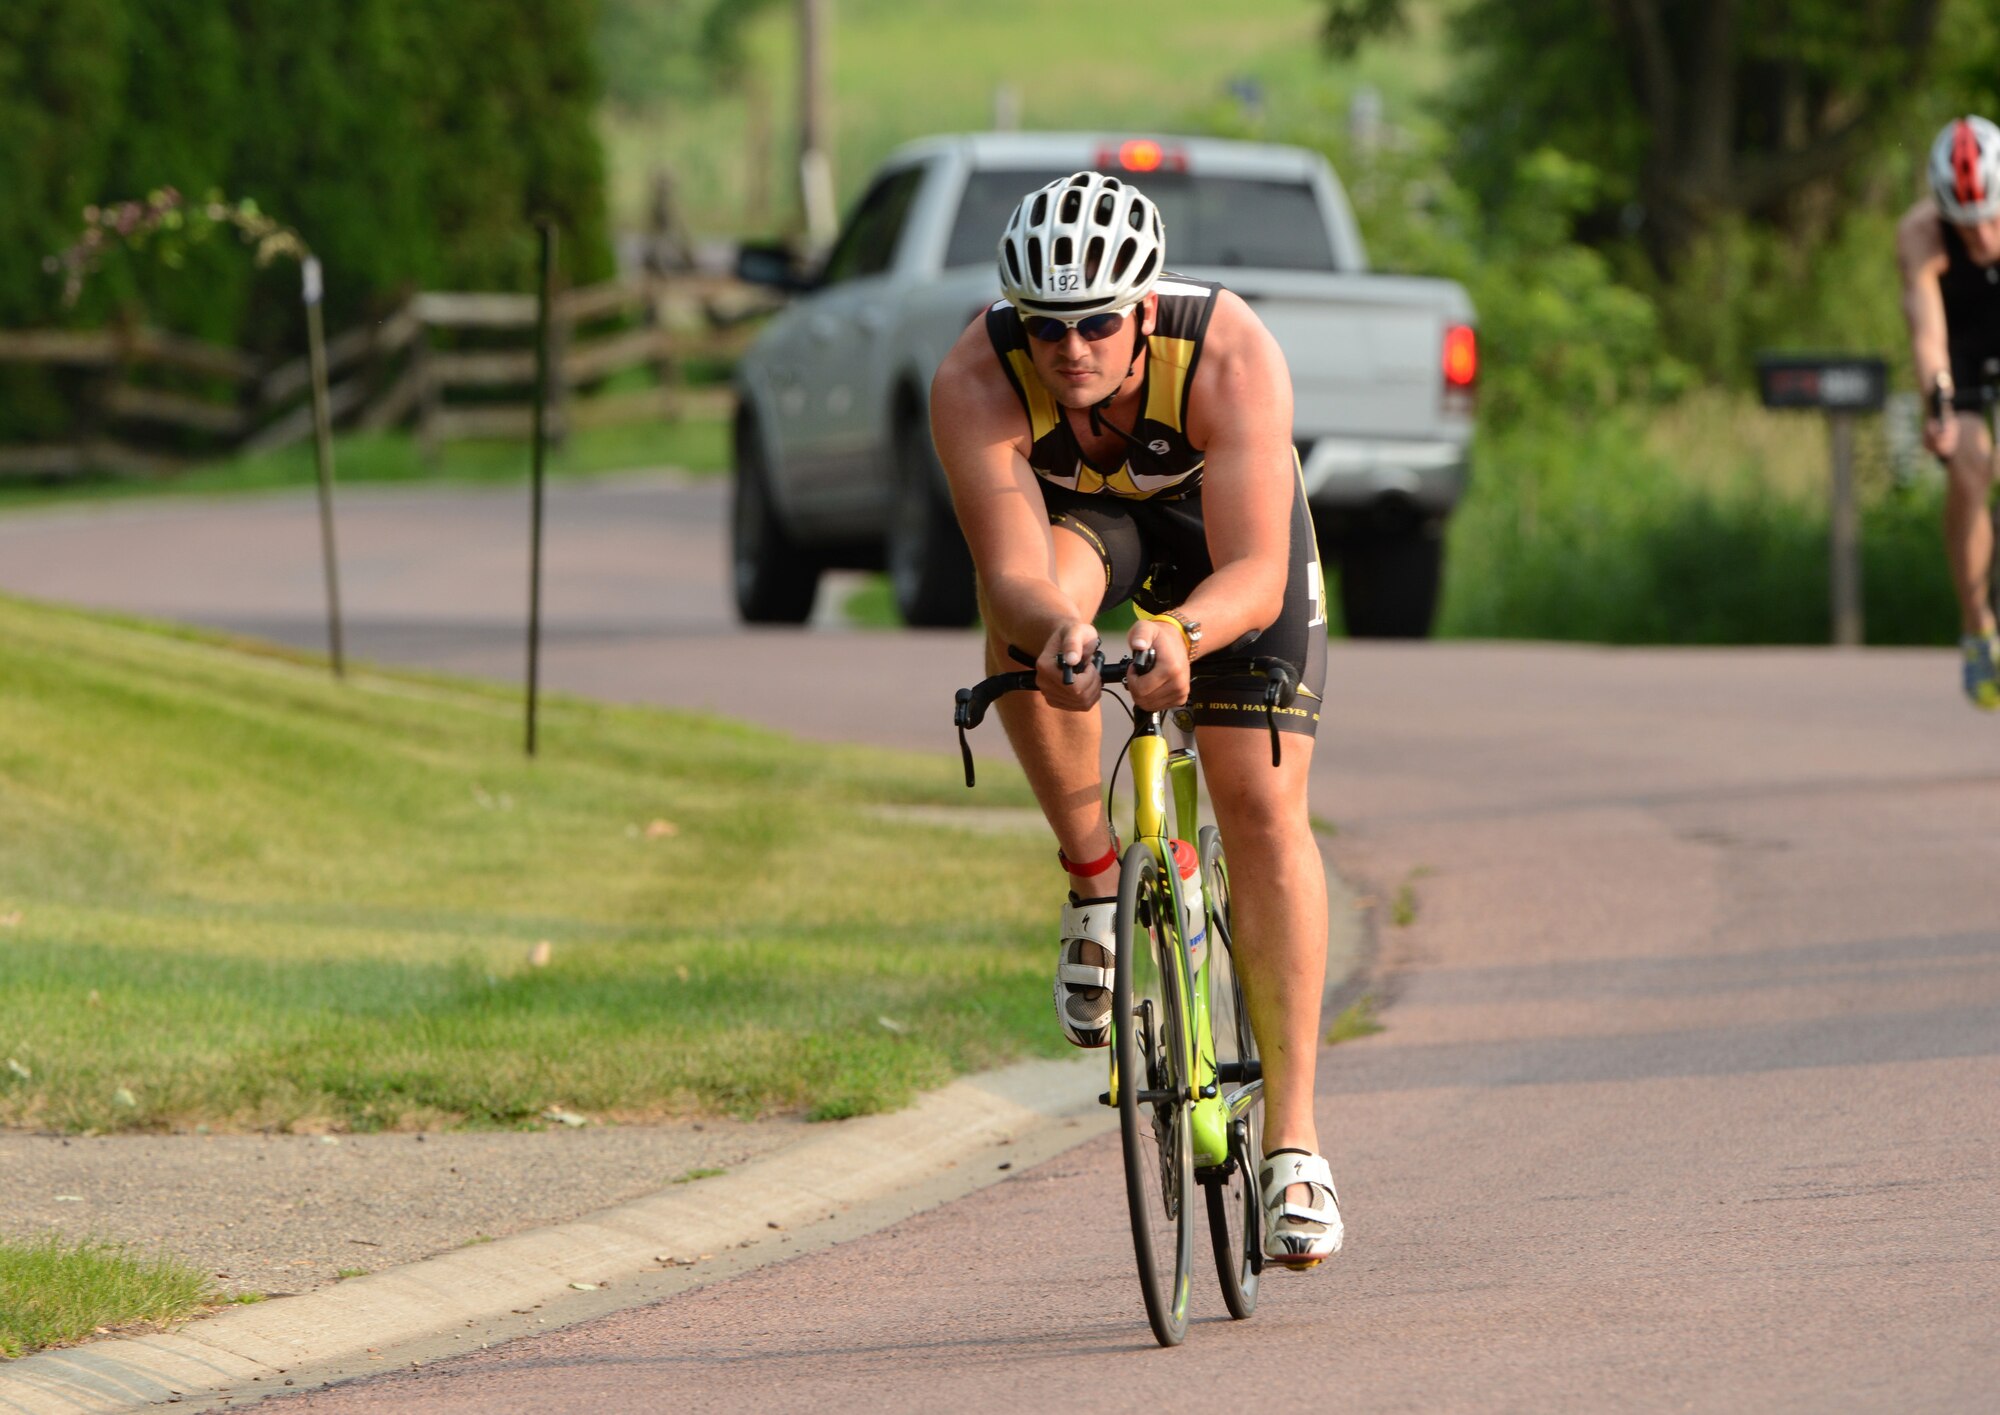 Senior Airman Michael Considine powers through the curves around West Lake, during the second leg of the University of Okoboji Triathlon in Okoboji, Iowa on July 19, 2014. Considine is a member of the Iowa Air National Guard in Sioux City, IA and is also a full time student. As an avid triathlete, Considine competes individually and as a member of the University of Iowa Triathlon team. (U.S. Air National Guard photo by Master Sgt. Vincent De Groot/Released)